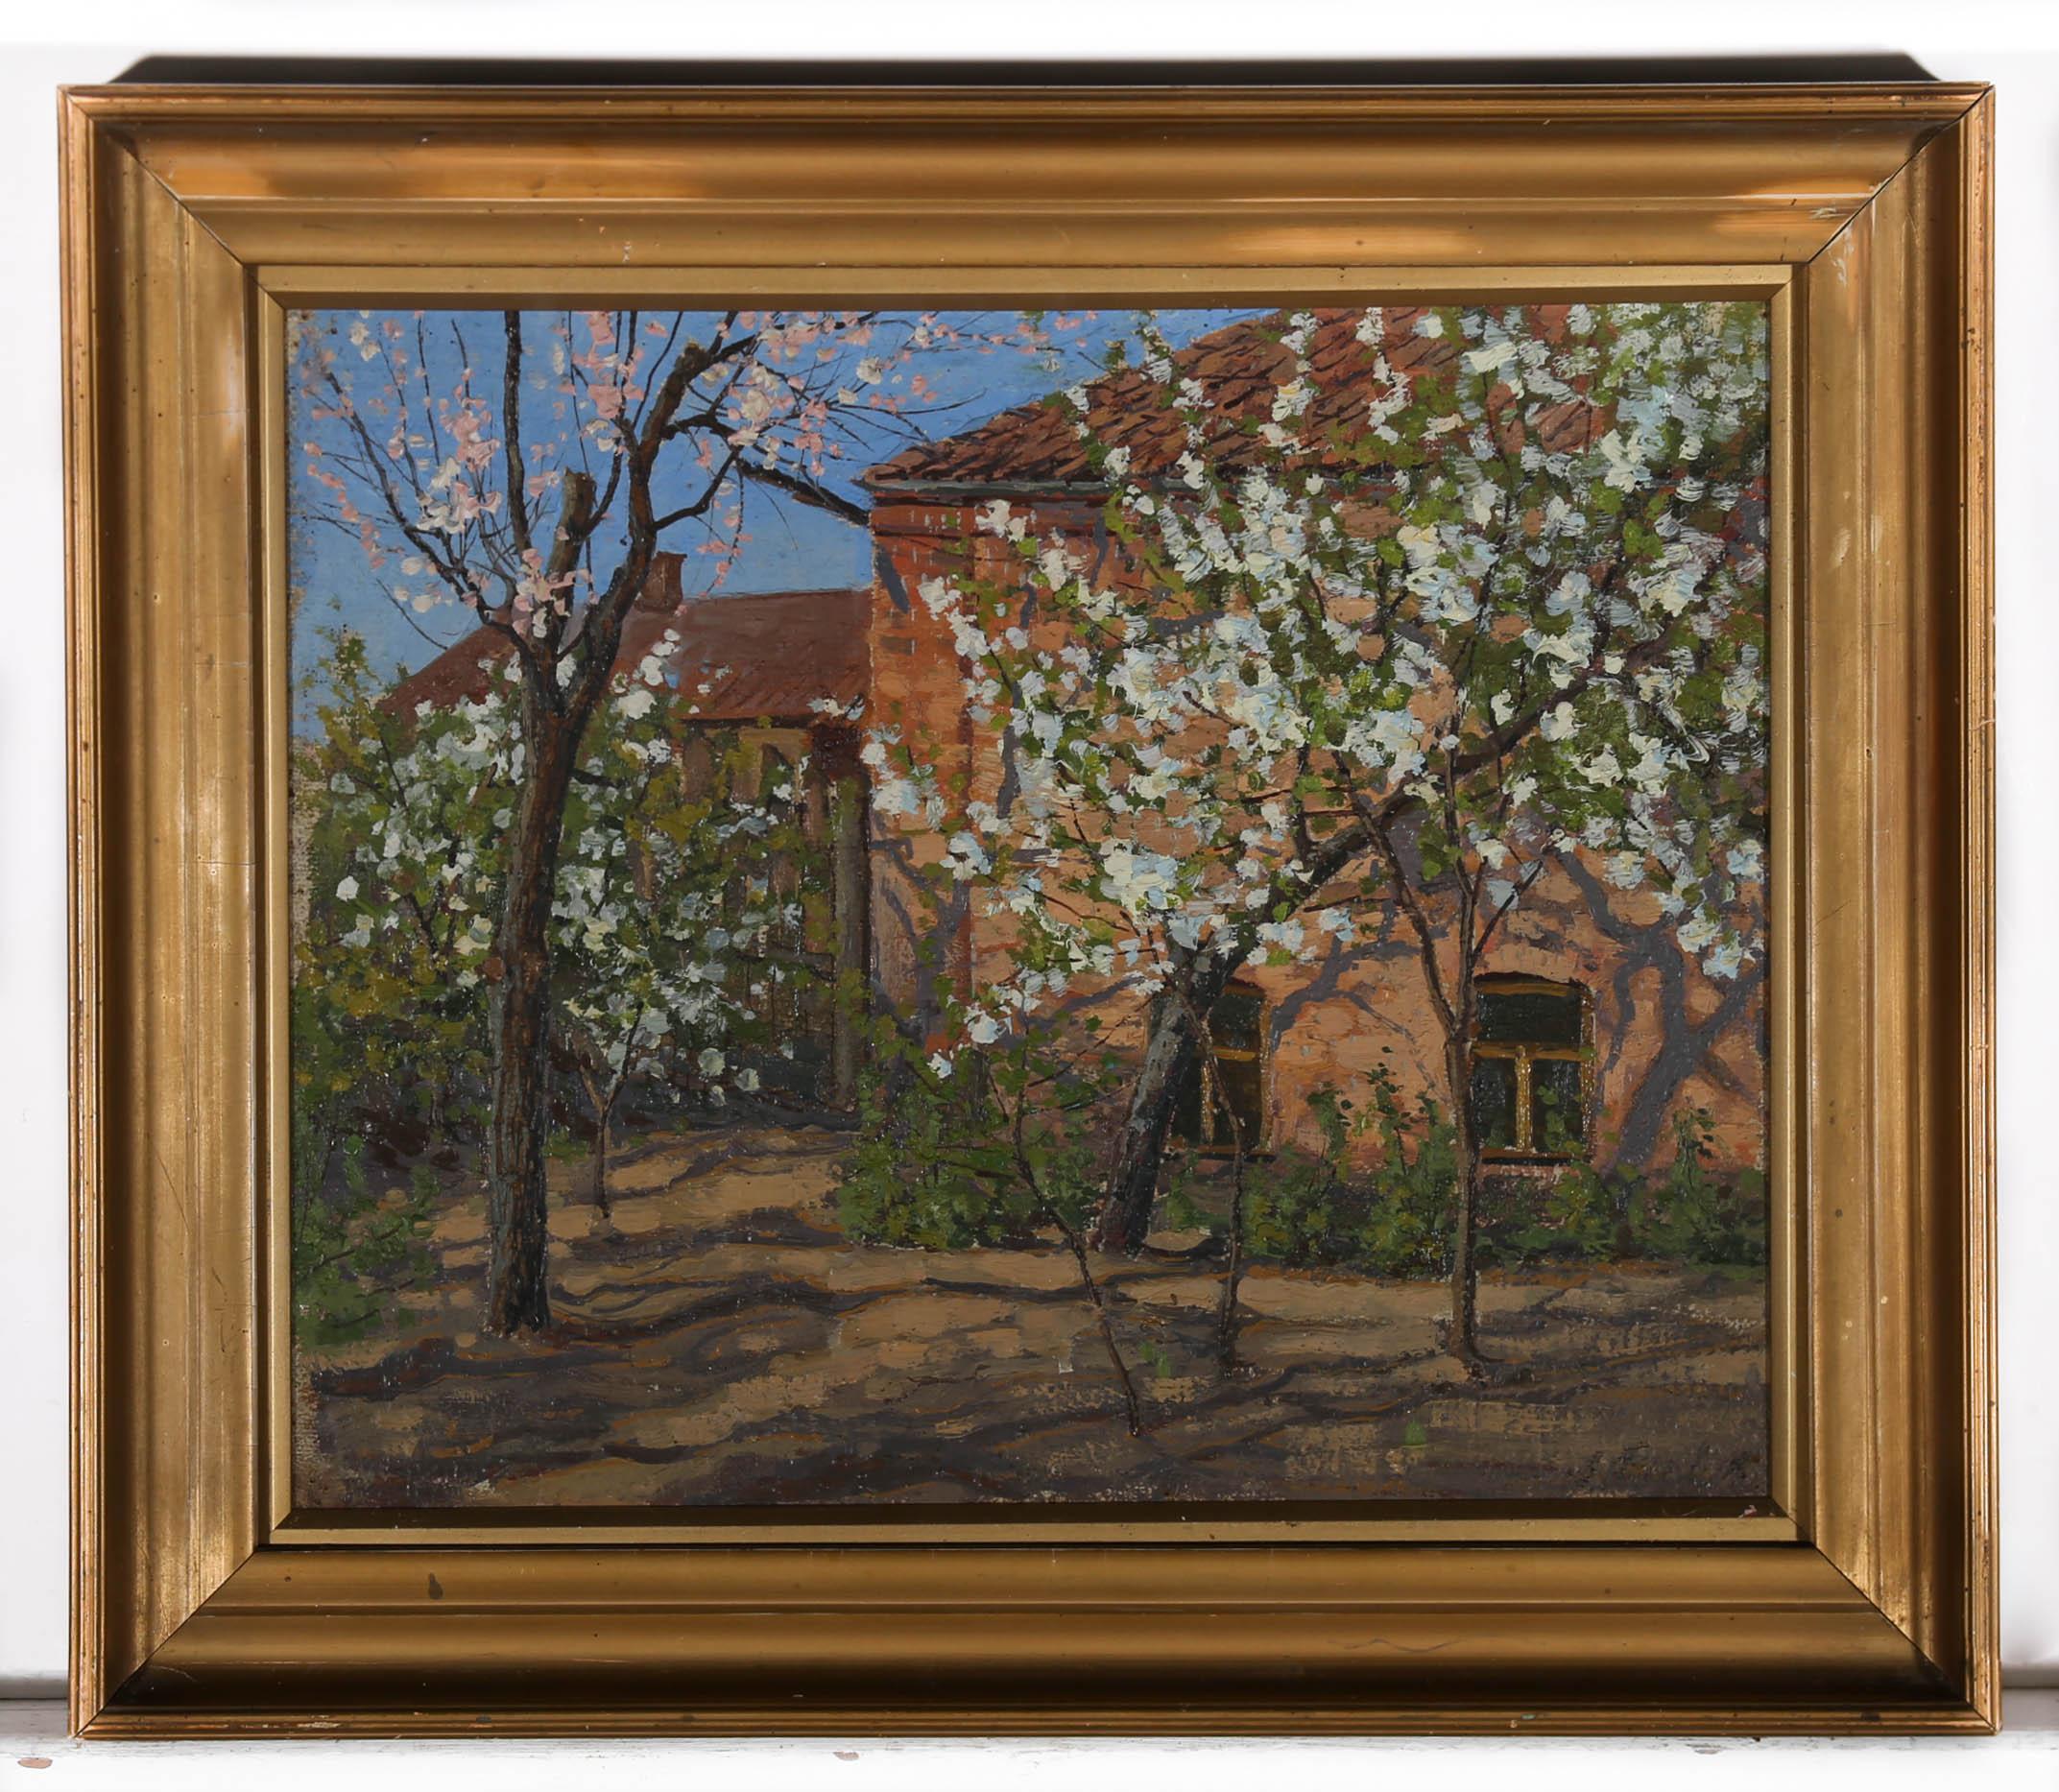 A welcome sign of spring. This wonderful continental scene depicts french farm buildings, mottled by impressive cherry trees in blossom. The artist has painted each delicate bloom in an impasto dabbing motion, generating a joyous sense of movement